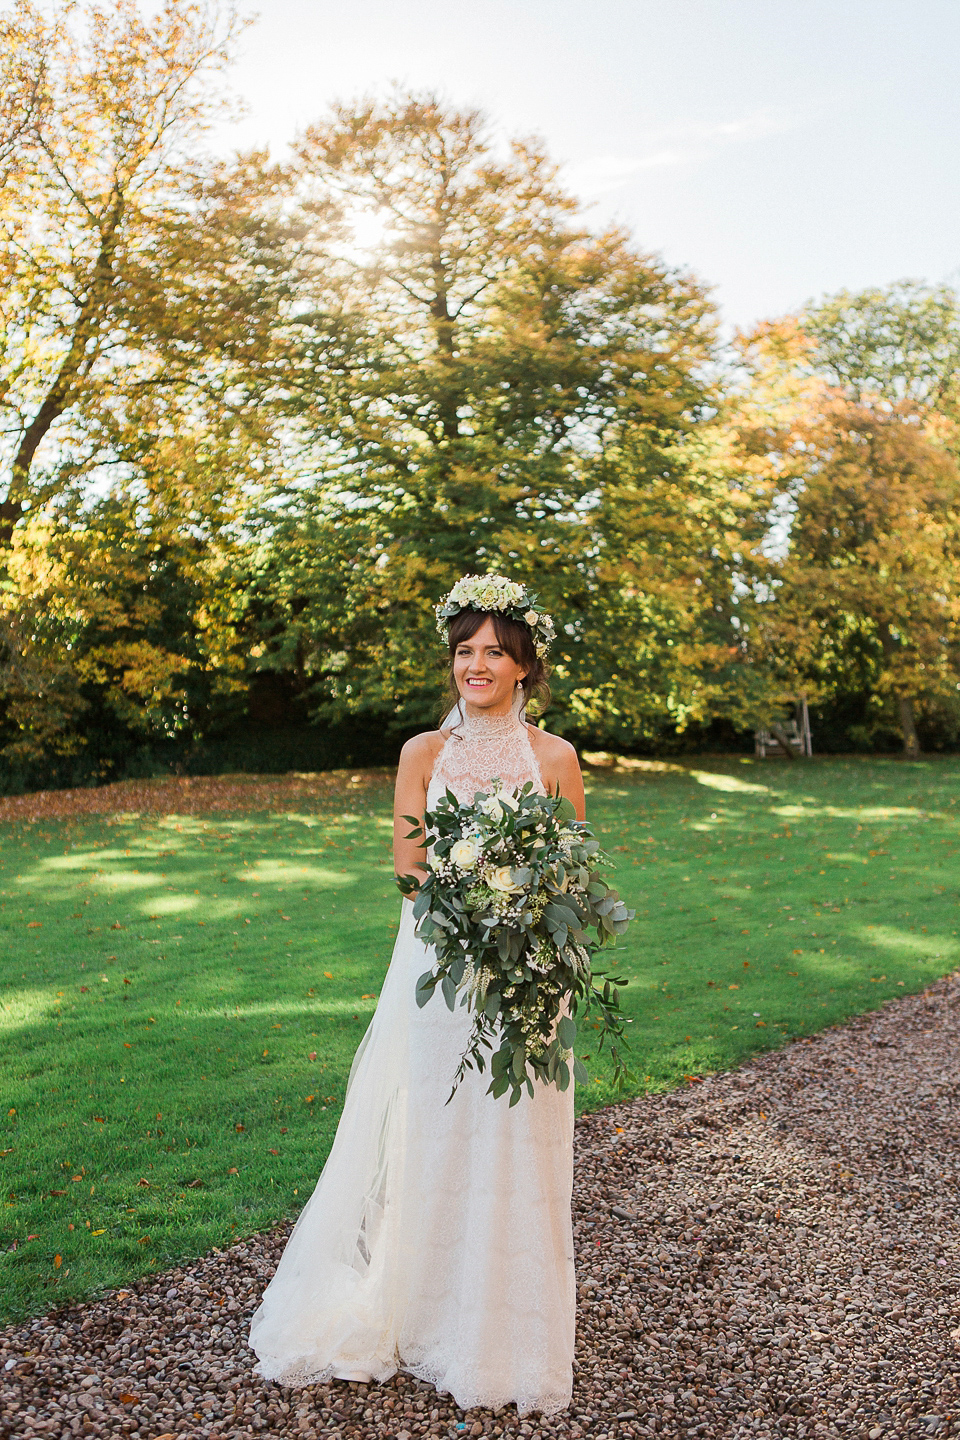 Jill wears an Essense of Australia gown for her Autumn wedding at Ellingham Hall in Northumberland. Photography by Helen Russell.